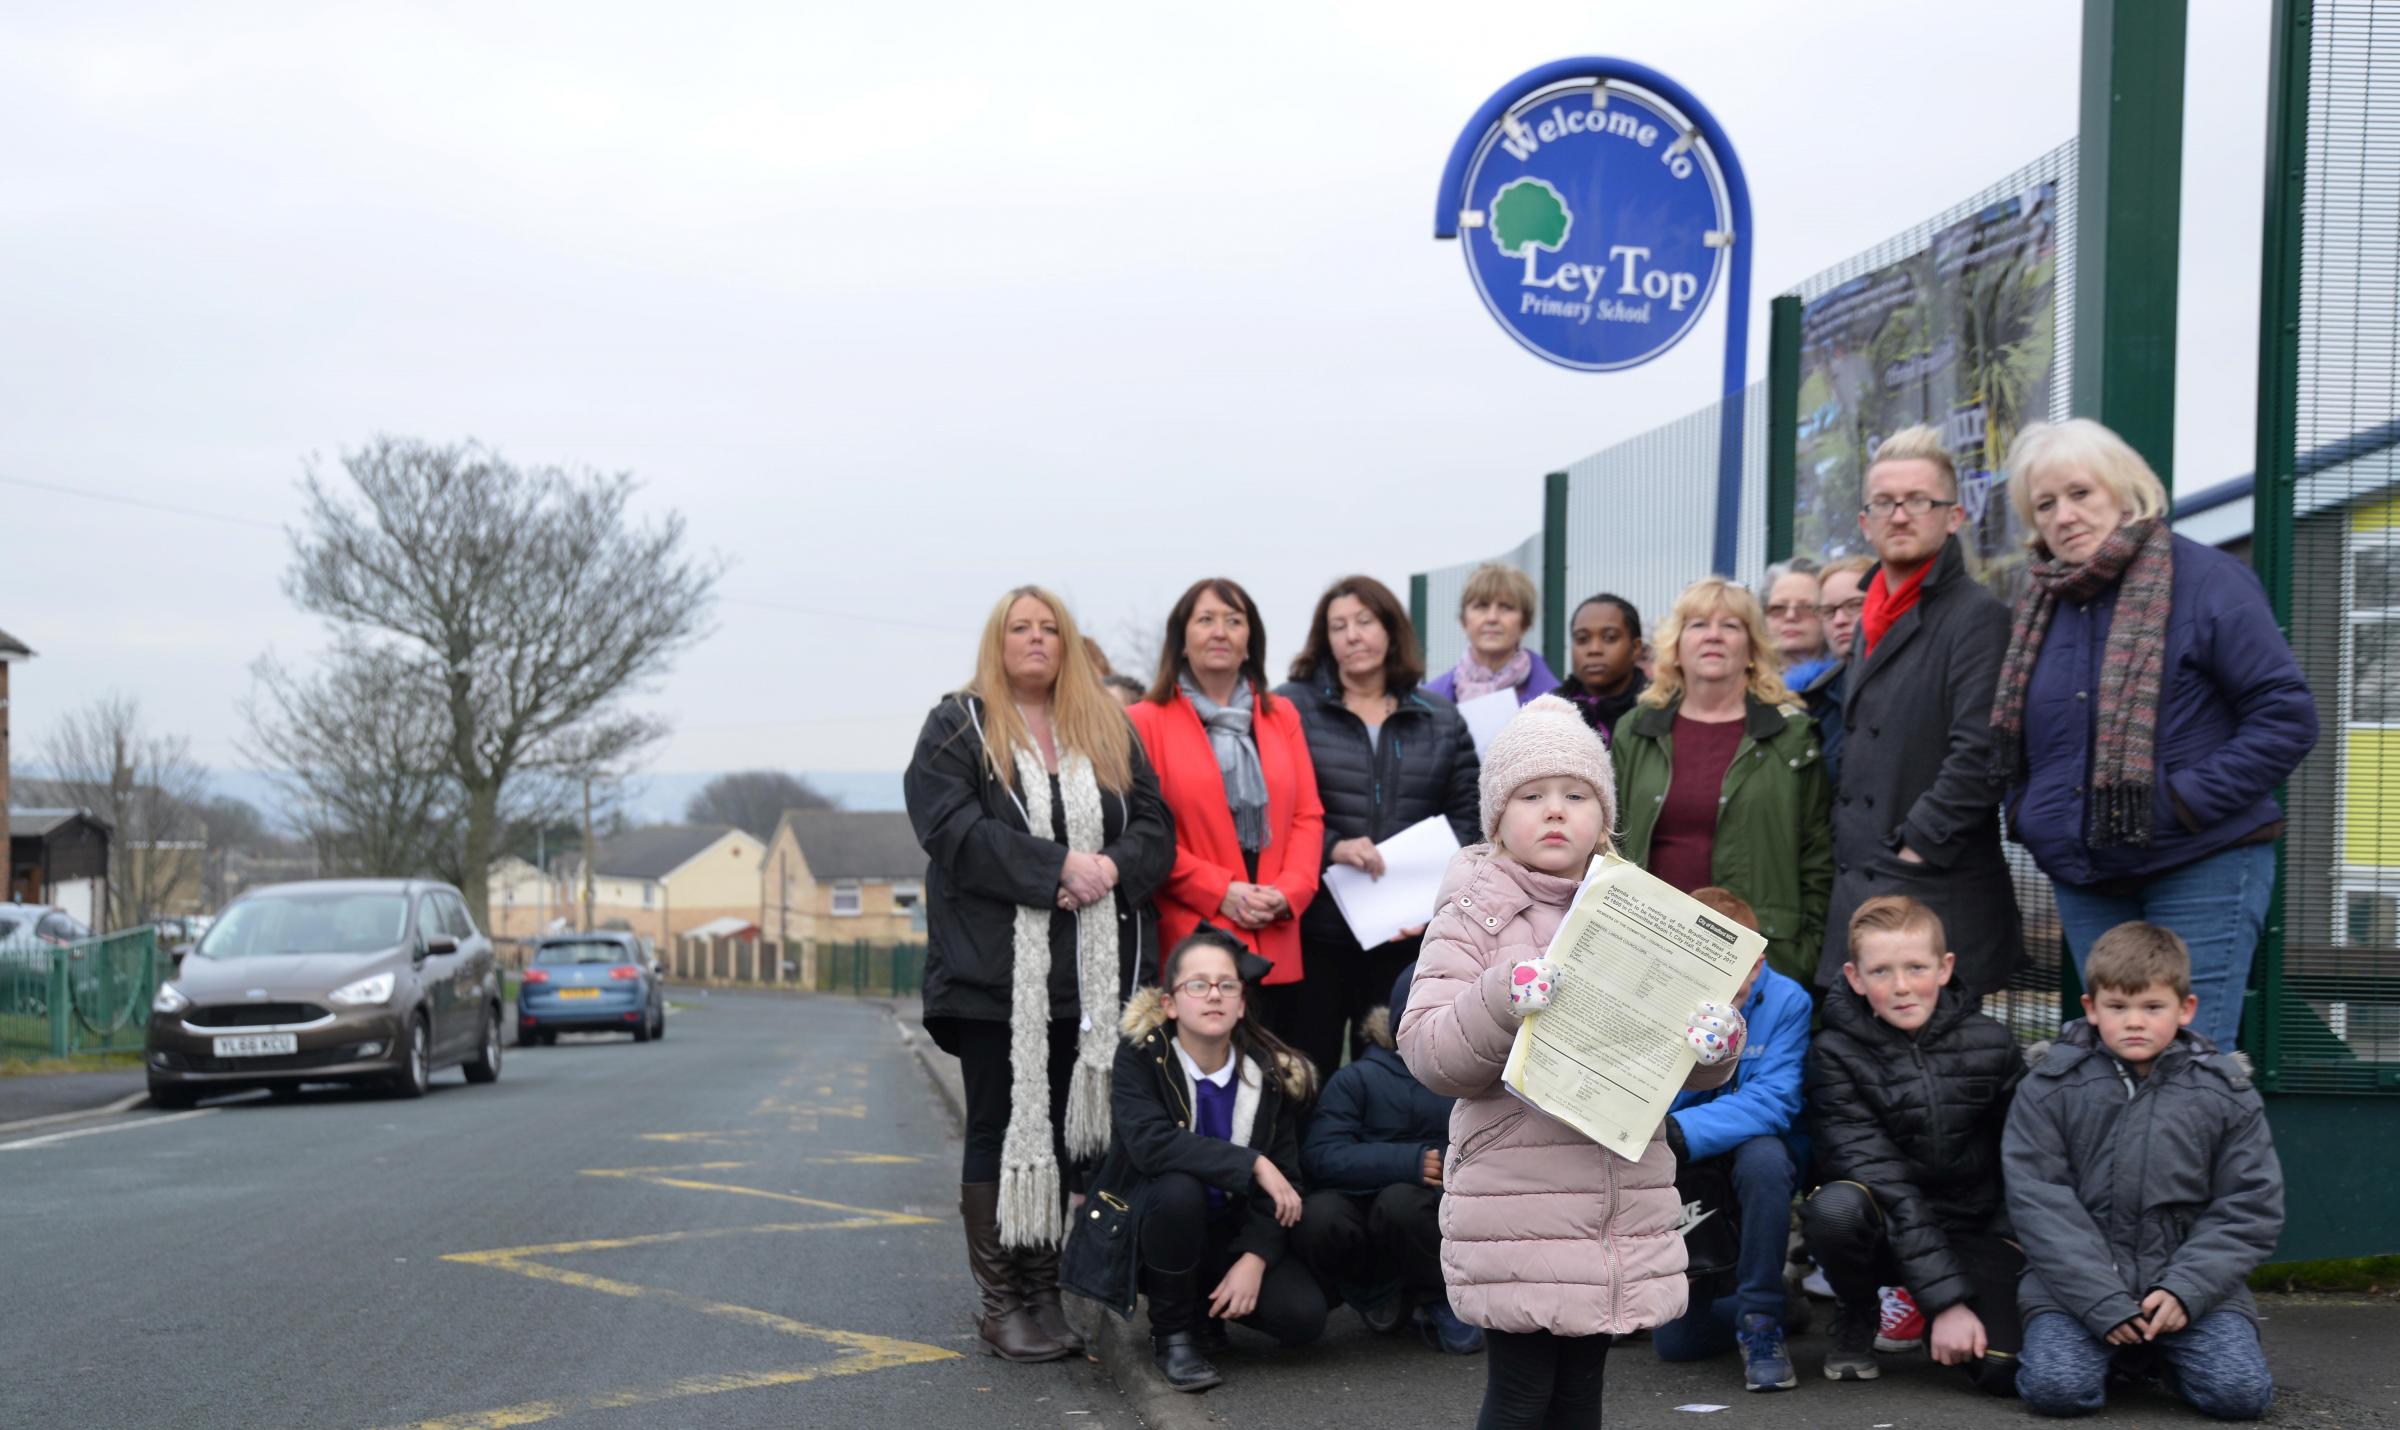 Calls for speed bumps near school to combat 'ridiculous' drivers